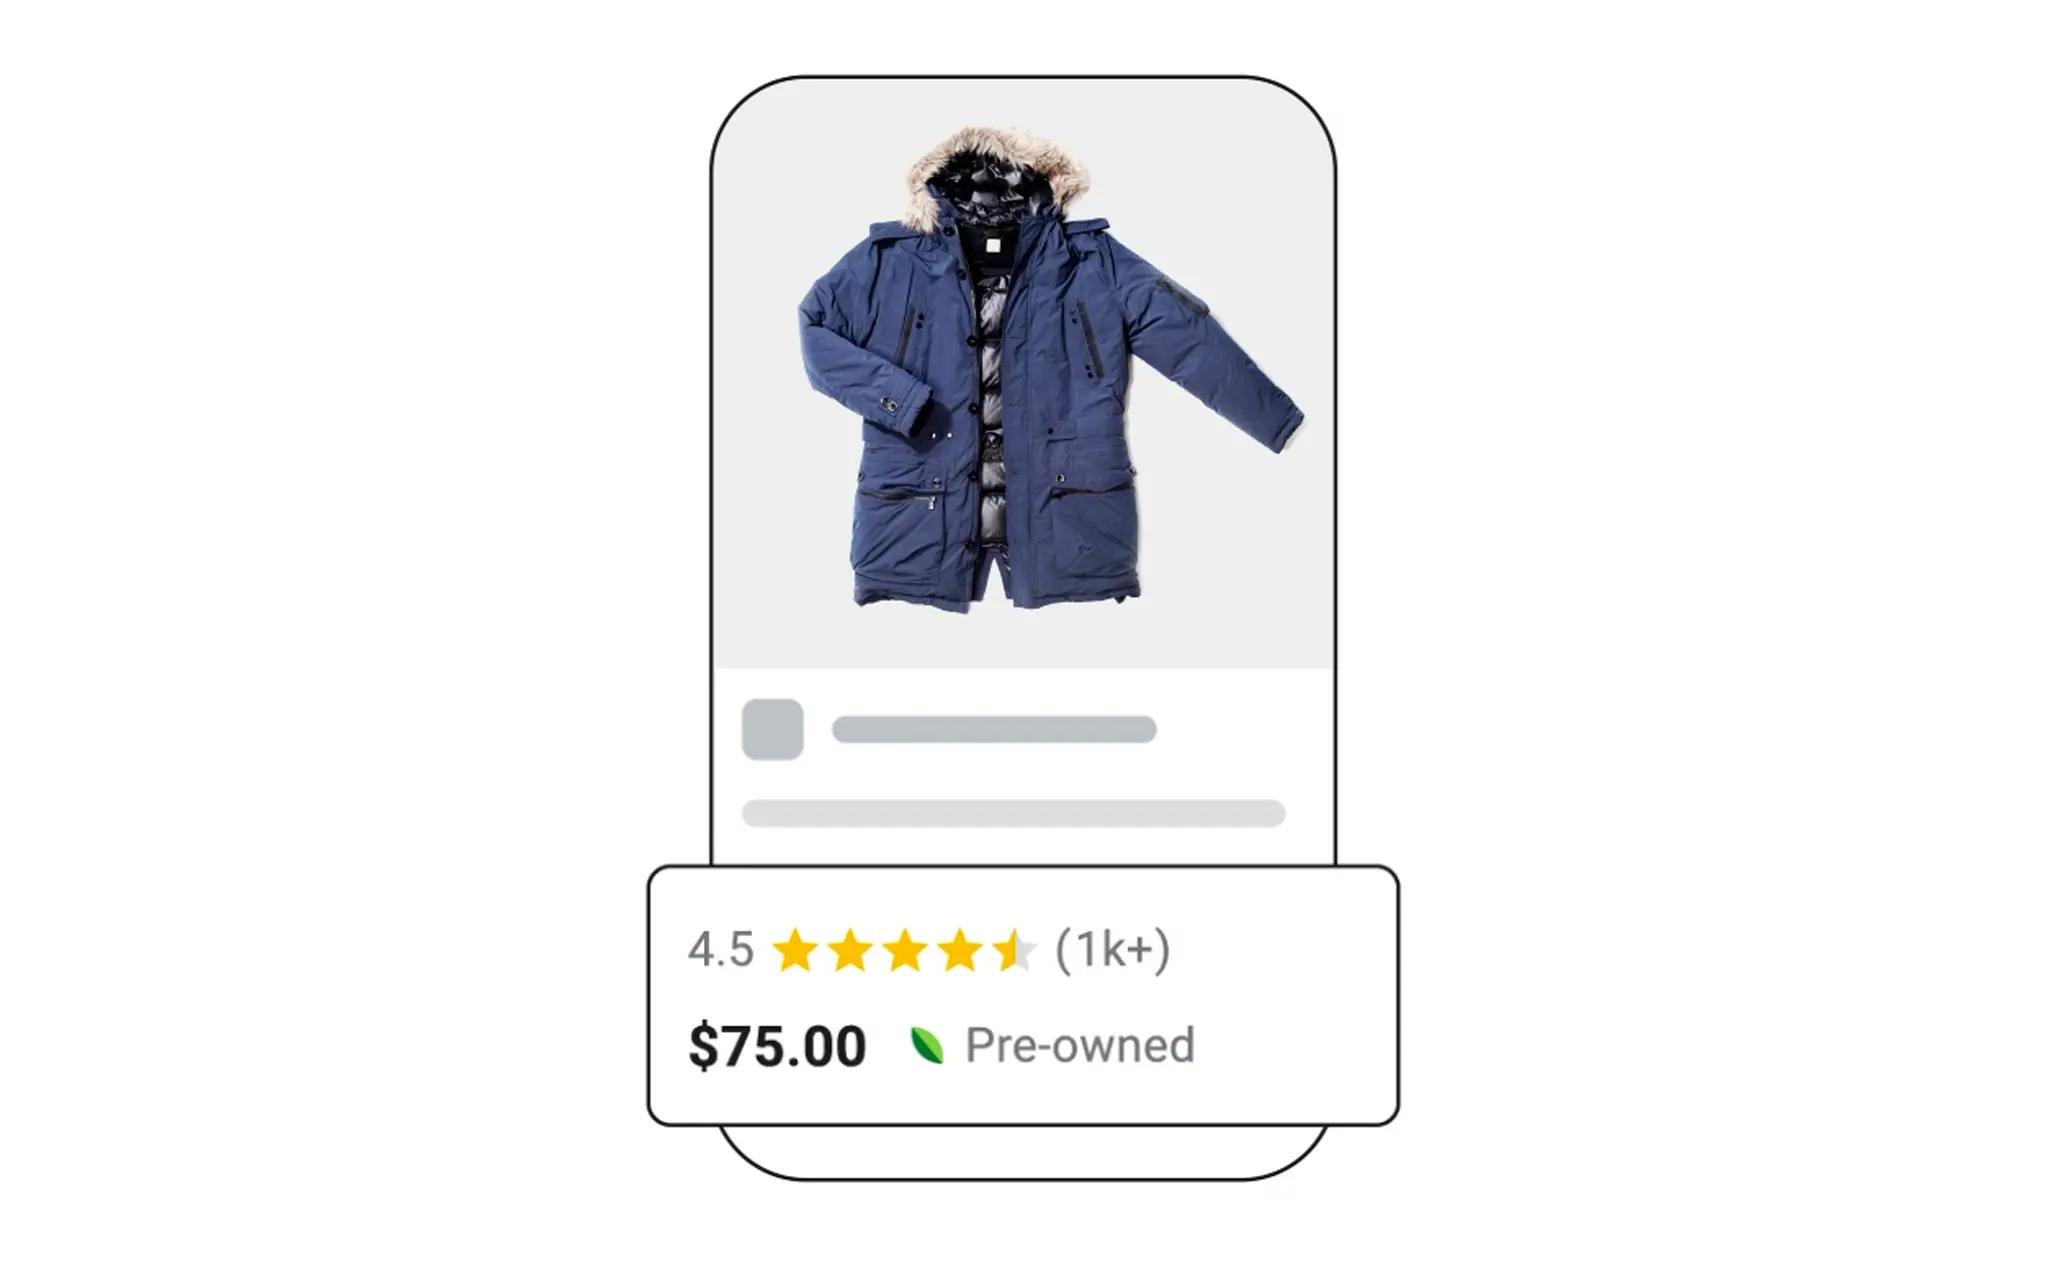 Google's new search results for pre-owned clothing showing a coat with the leaf icon